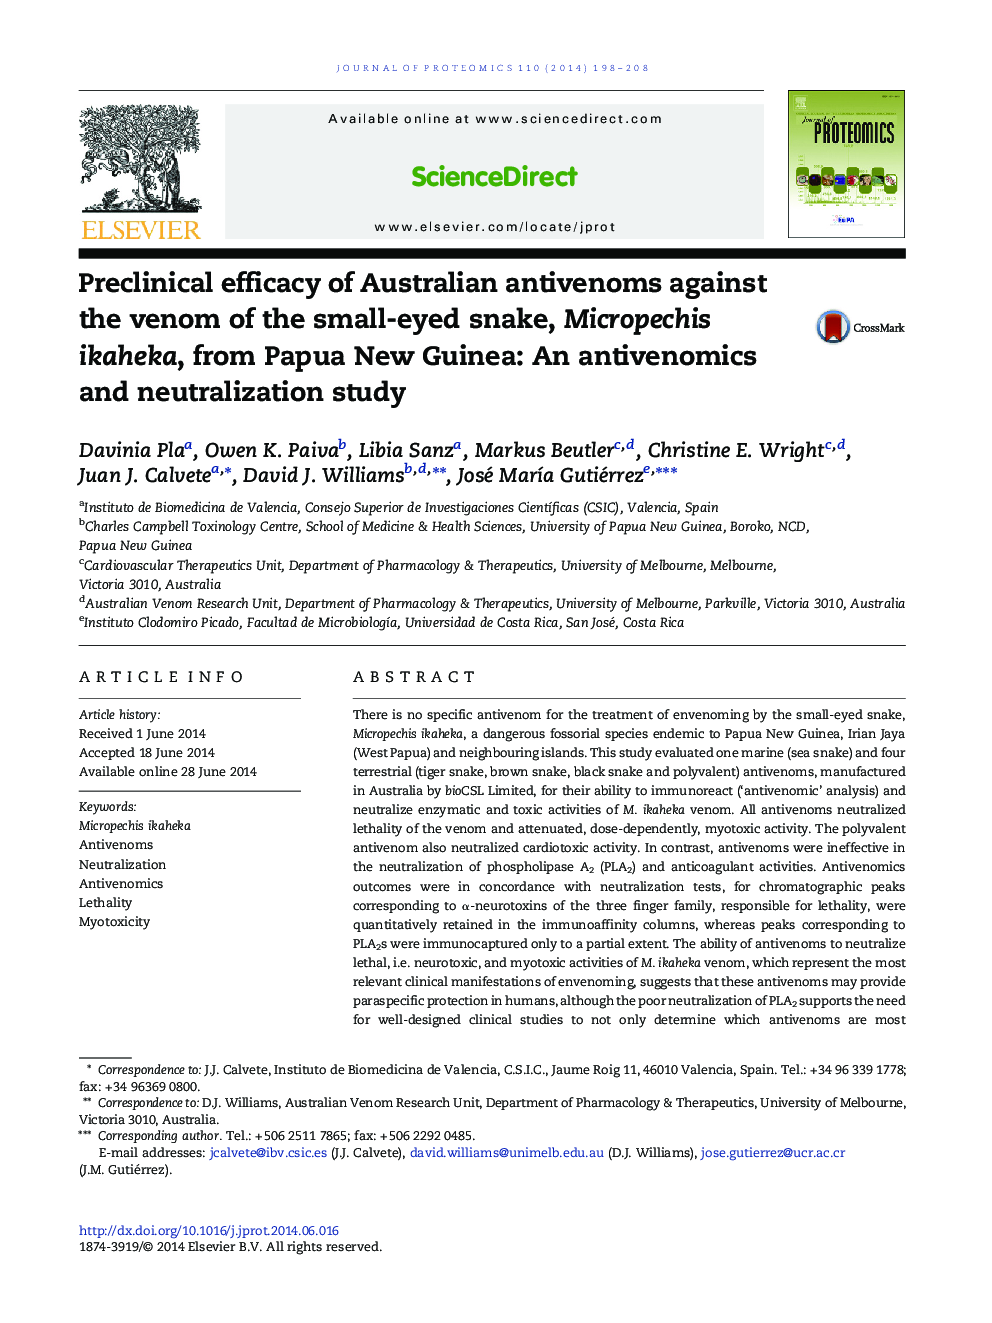 Preclinical efficacy of Australian antivenoms against the venom of the small-eyed snake, Micropechis ikaheka, from Papua New Guinea: An antivenomics and neutralization study